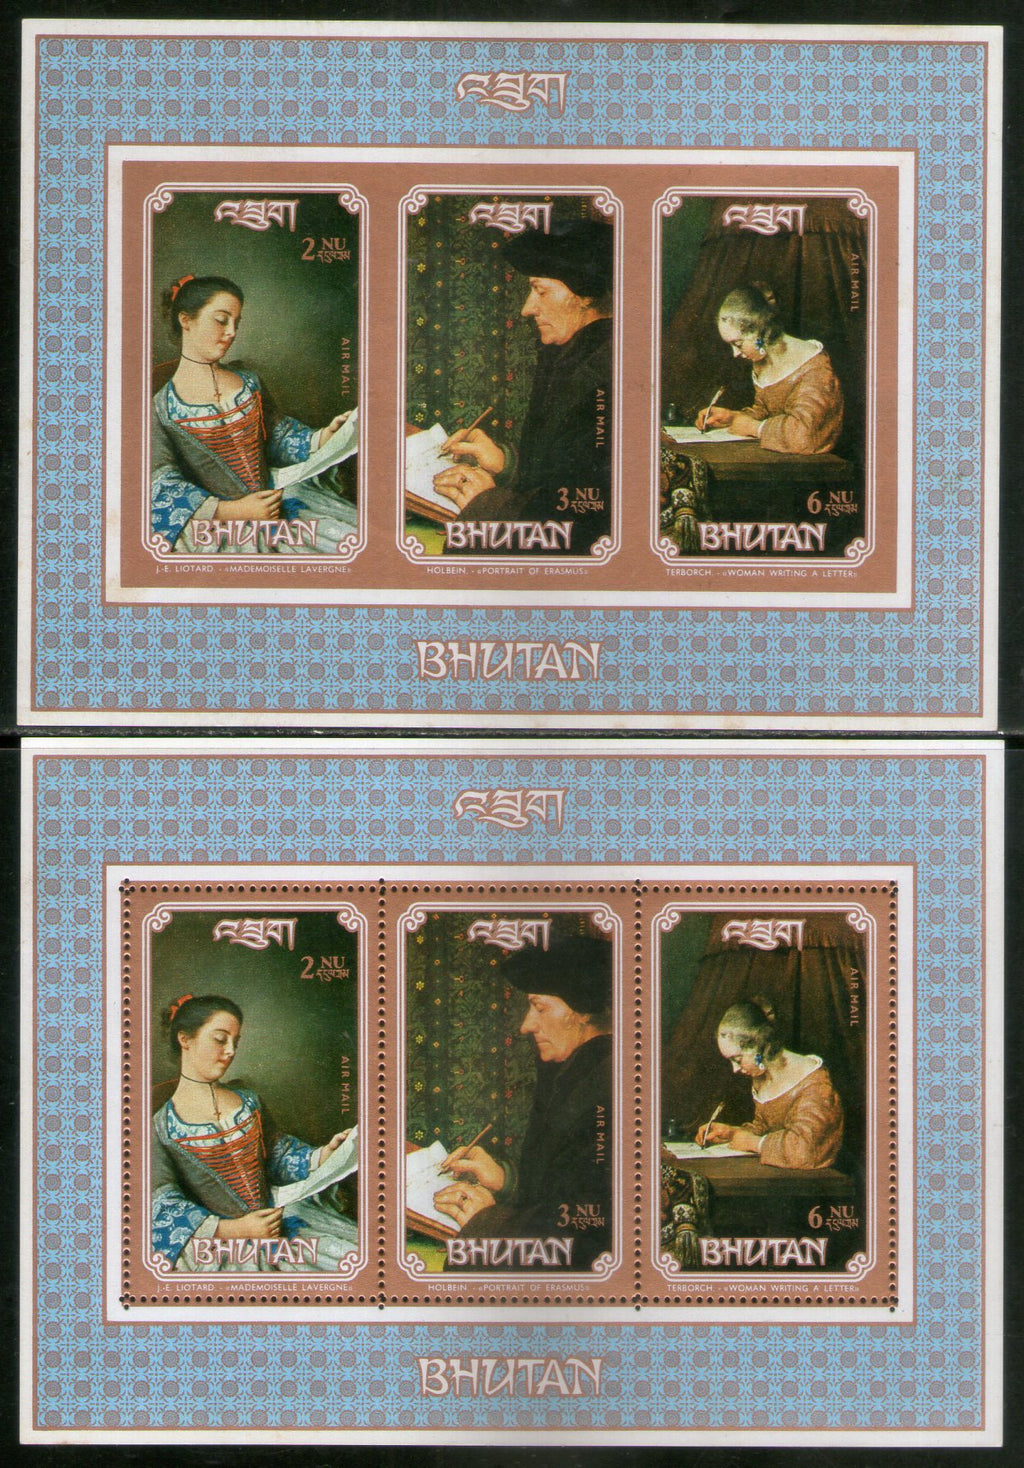 Bhutan 1993 Paintings Sc 1090a Perf & Imperf M/s MNH # 8434